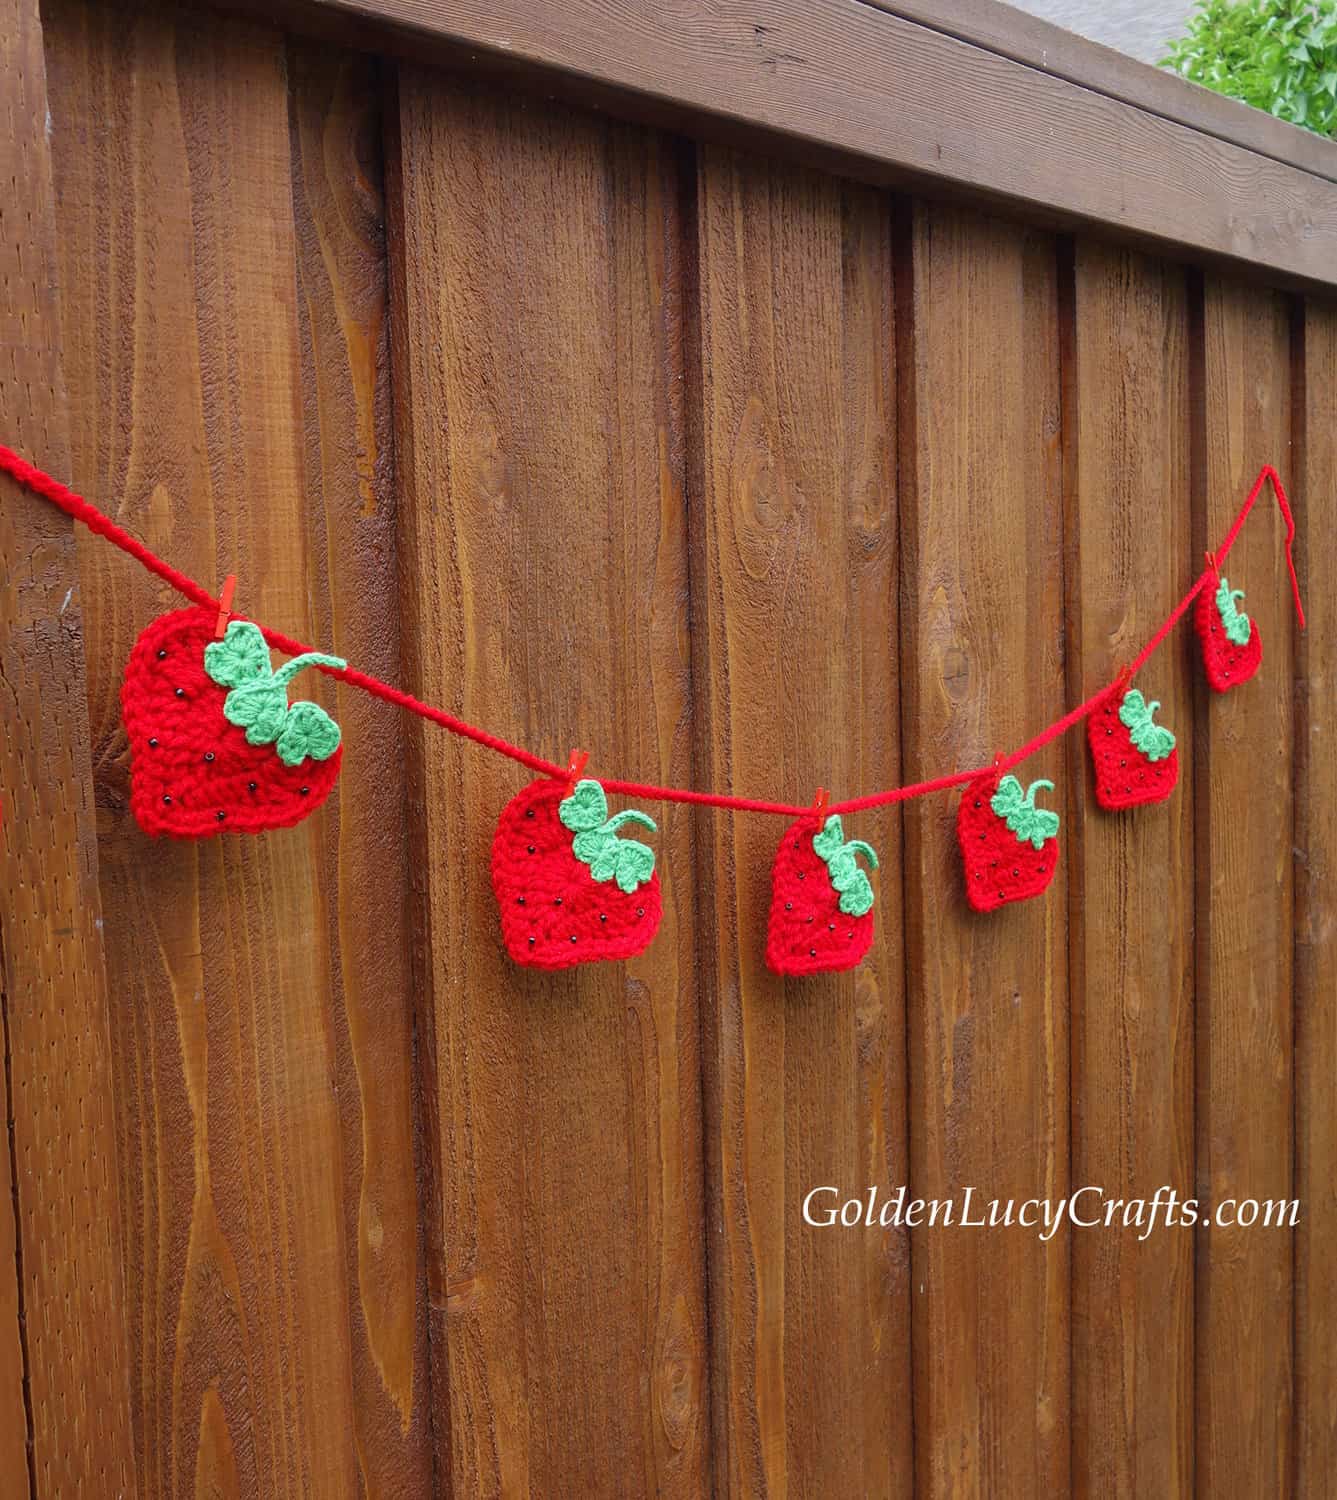 Crocheted strawberry garland hanging on the blown fence.